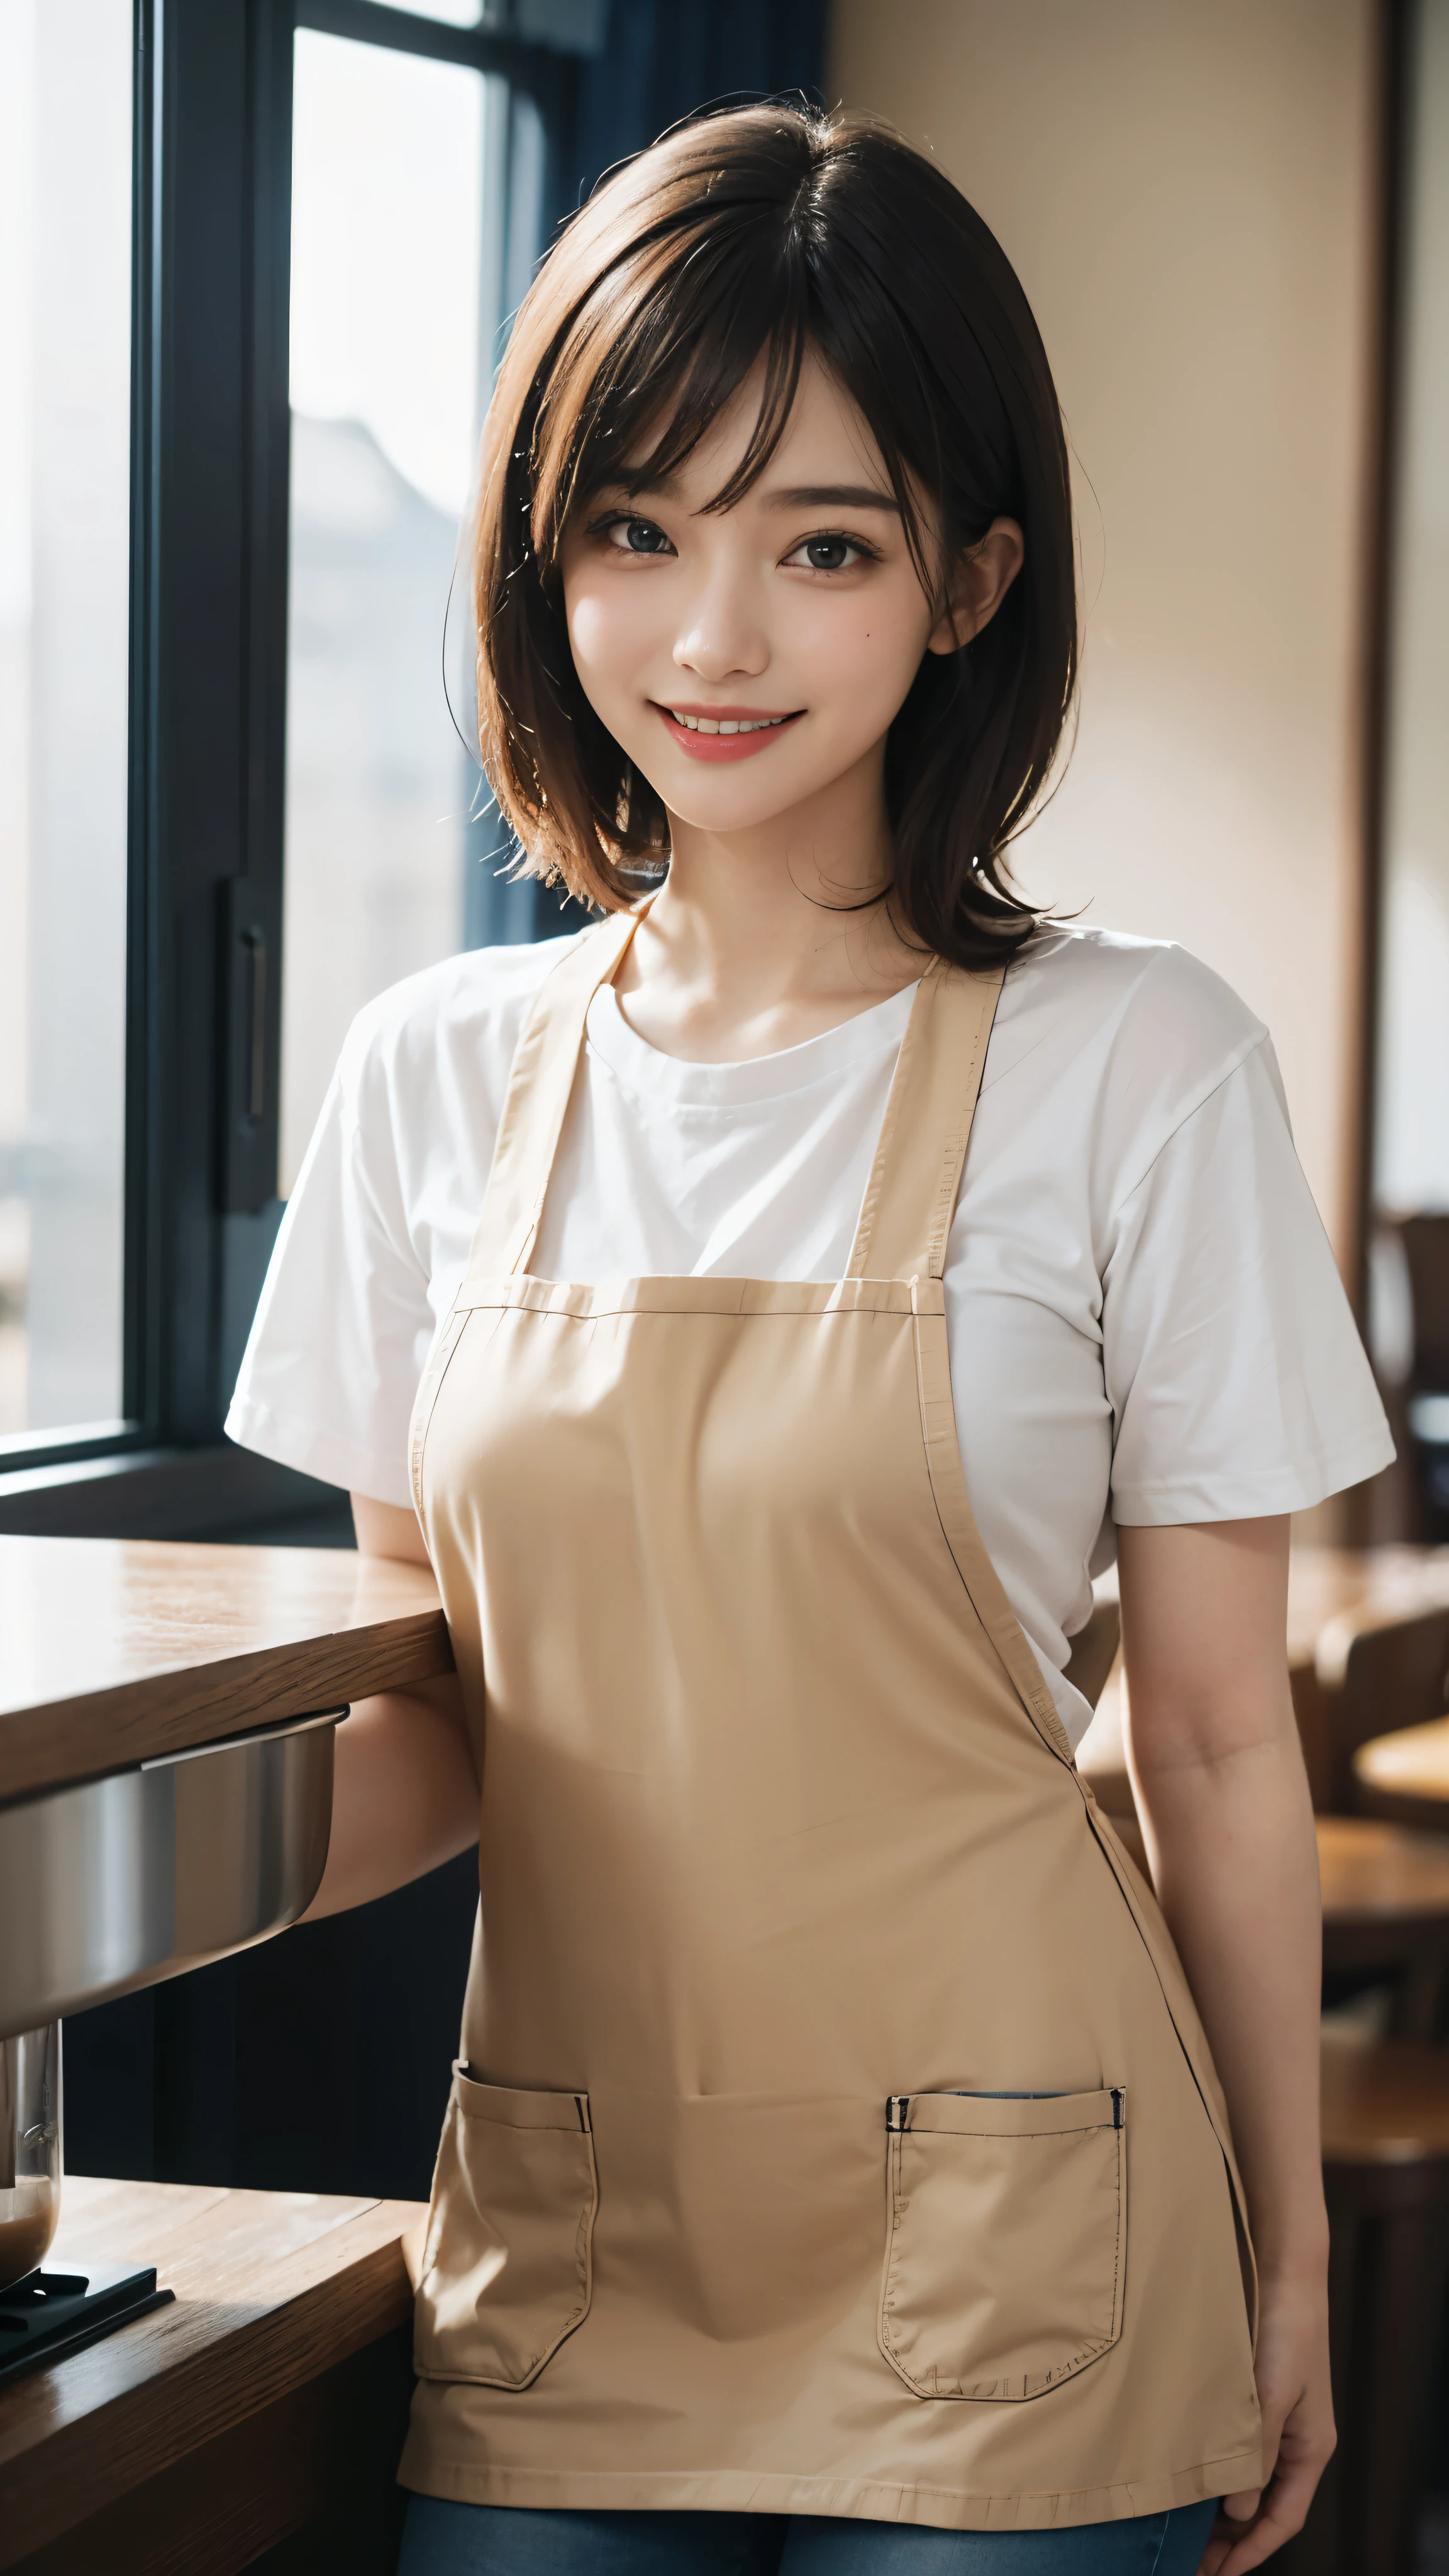 highest quality, pieces fly, ultra high resolution, (that&#39;realistic:1.4), RAW photo, 1 girl, Mr. Kｰpop idol, ((cafe clerk)),((cute uniform)),(White T-shirt and jeans)),((Beige apron))short hair, slender body,fine eyes,(realistic eyes),delicate face,realsMr. Kin,fine hair,Detailed sMr. Kin,cute face,((smile))、((laughter))、((you look happy, smile)),